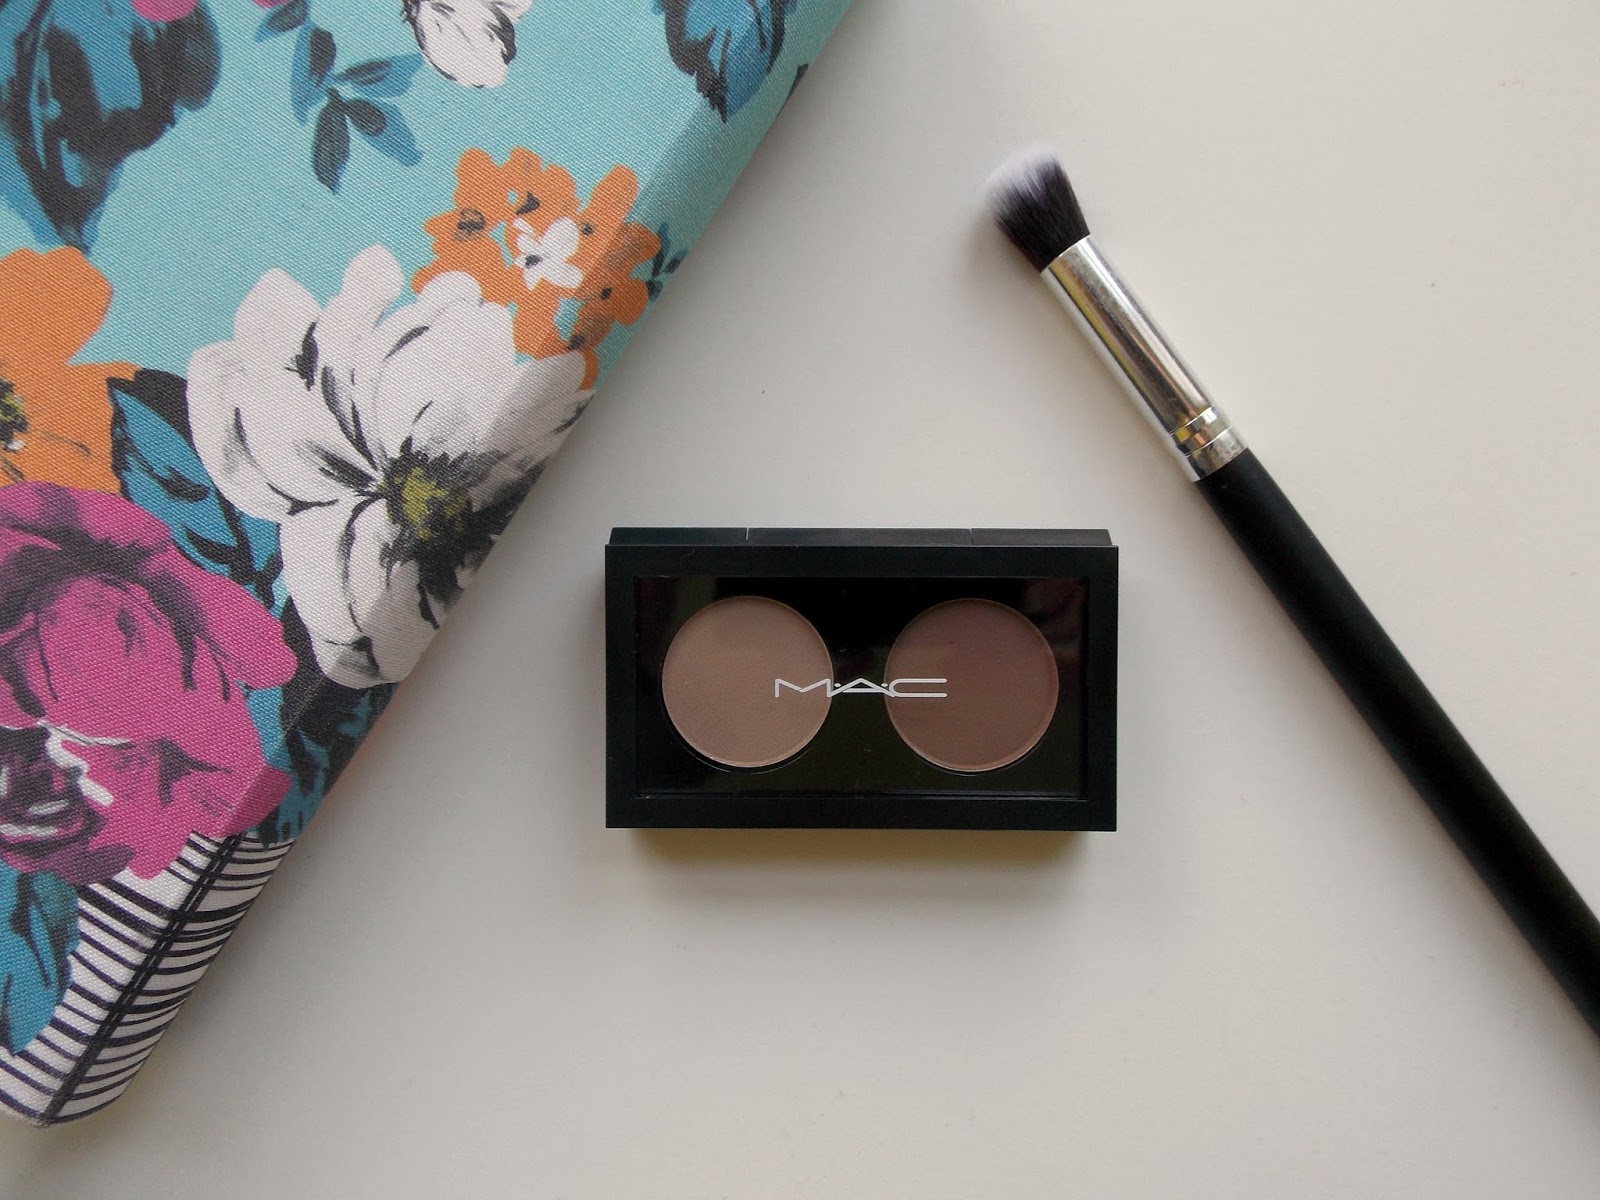 MAC Eyeshadow Duo: Review & Swatches | Jenny's Everyday Life